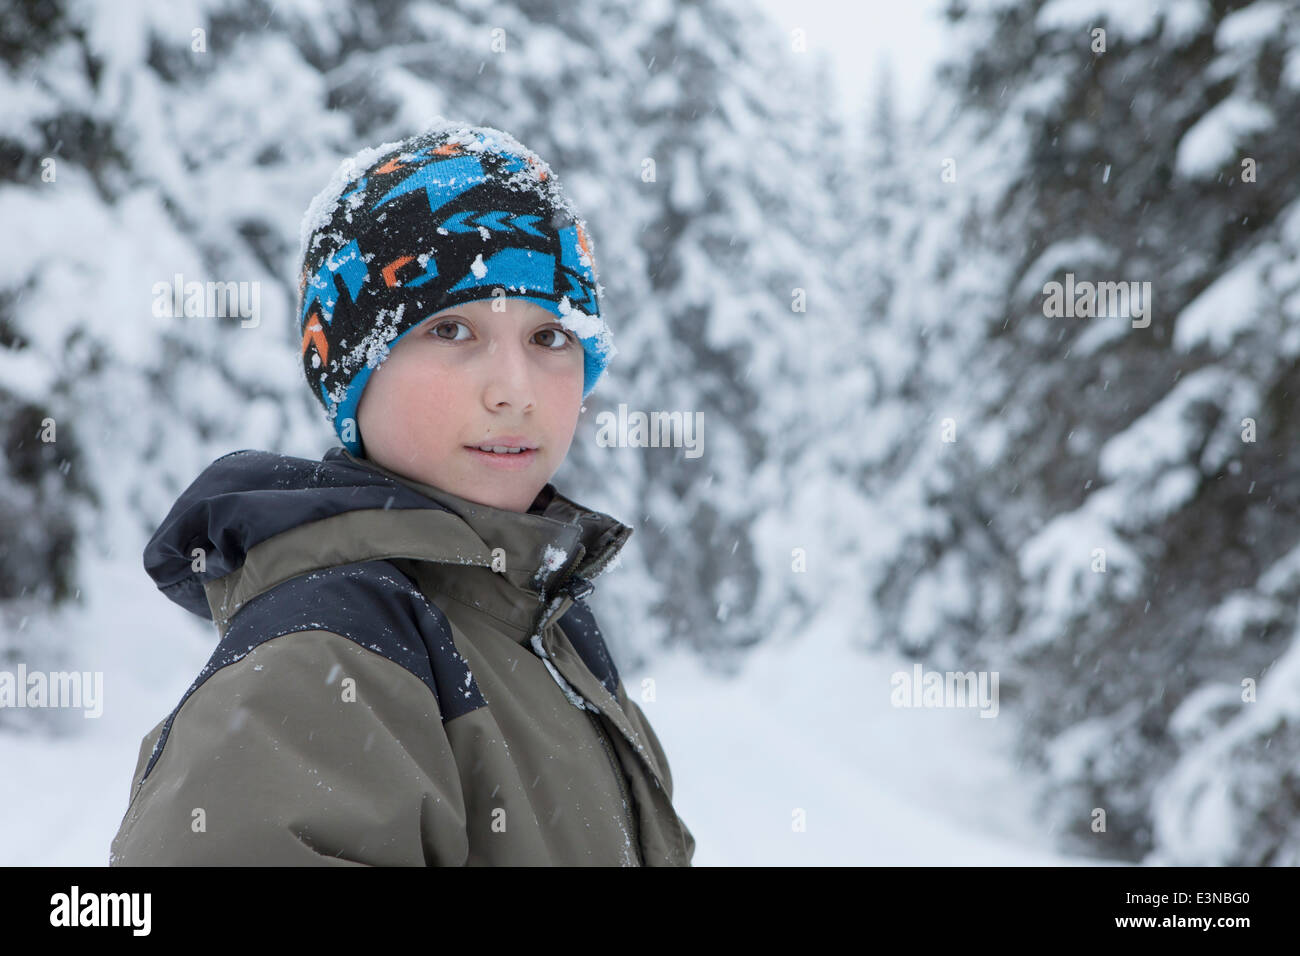 Portrait of confident boy wearing warm clothing during winter Stock Photo